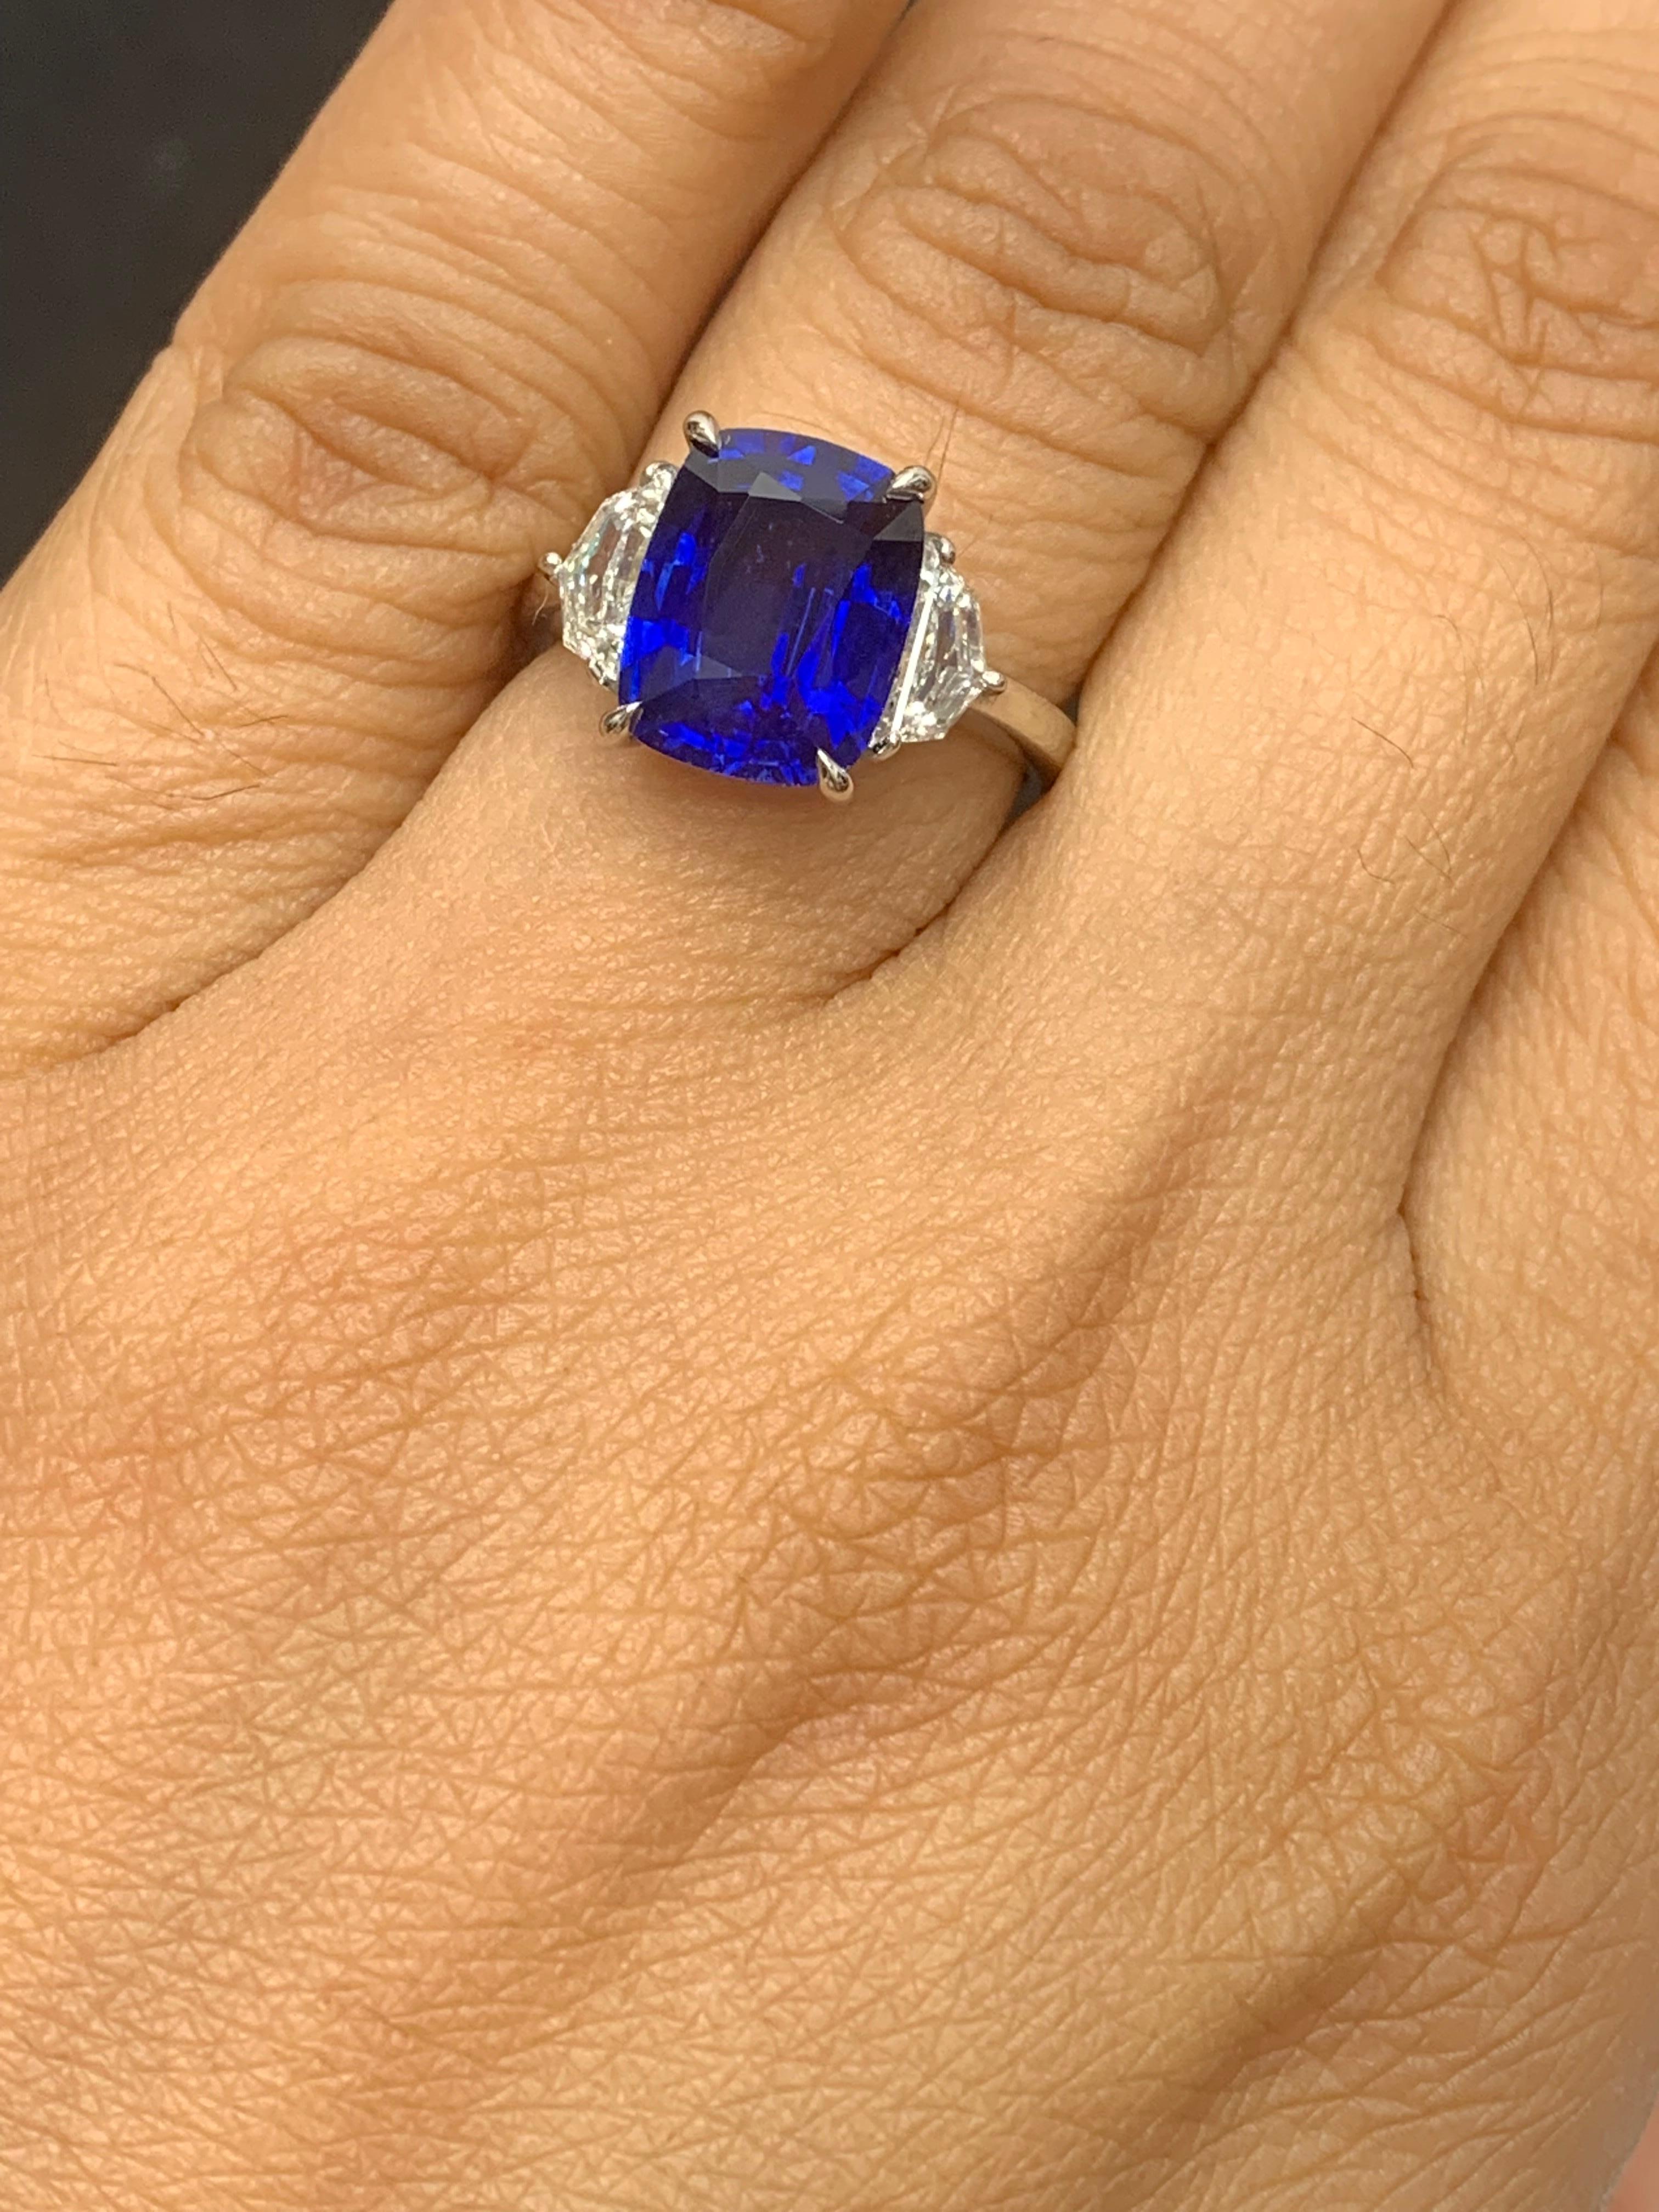 Certified 4.79 Carat Cushion Cut Sapphire & Diamond Engagement Ring in Platinum For Sale 1